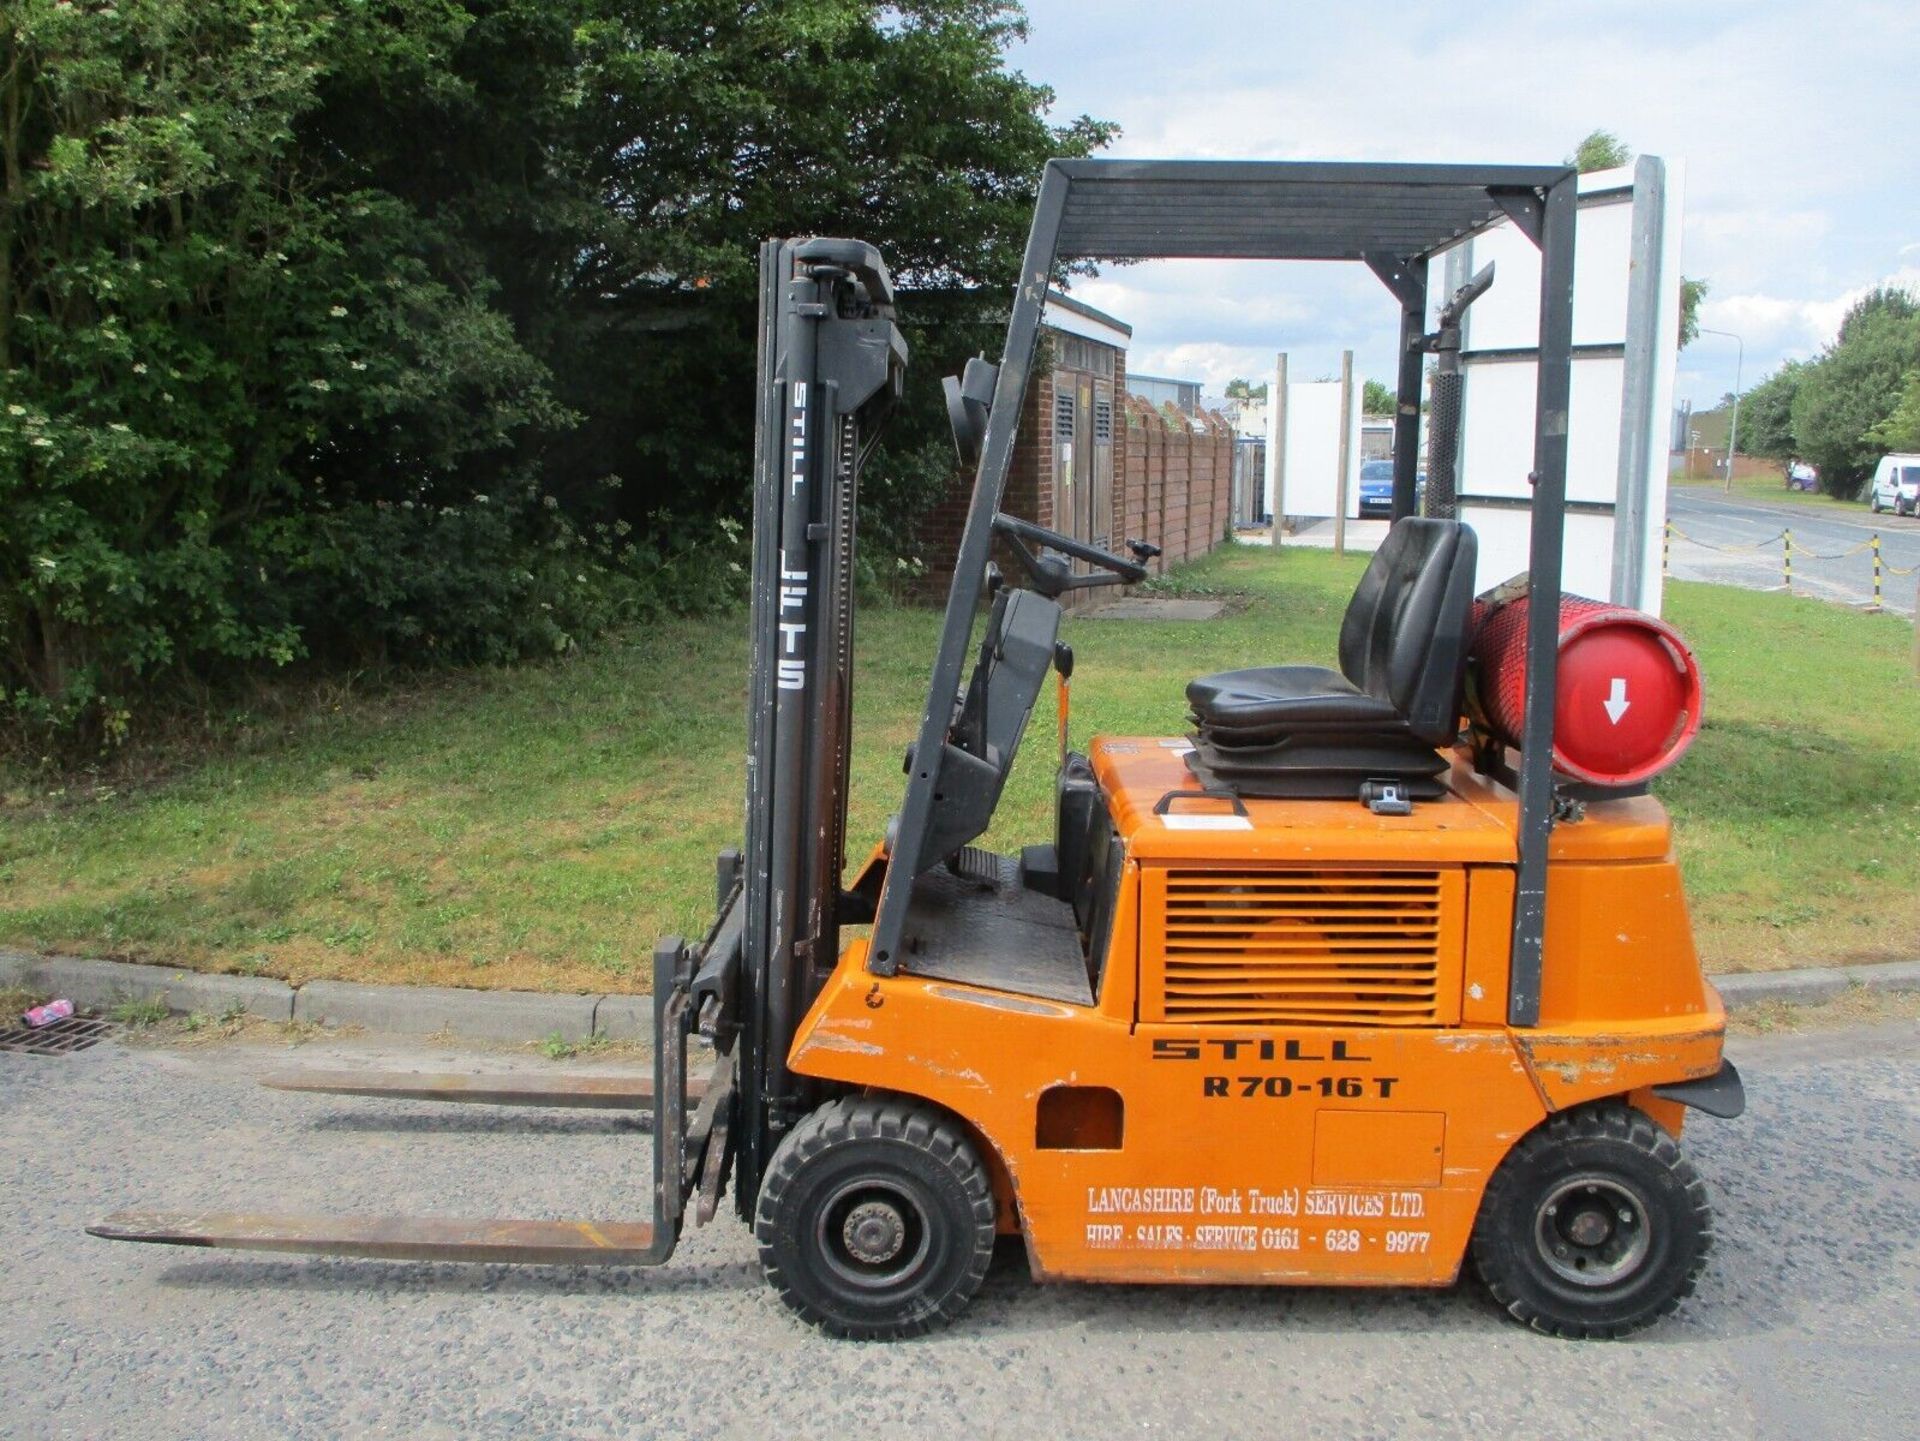 STILL R70-16T FORK LIFT FORKLIFT TRUCK STACKER CONTAINER SPEC TRIPLE MAST - Image 2 of 12